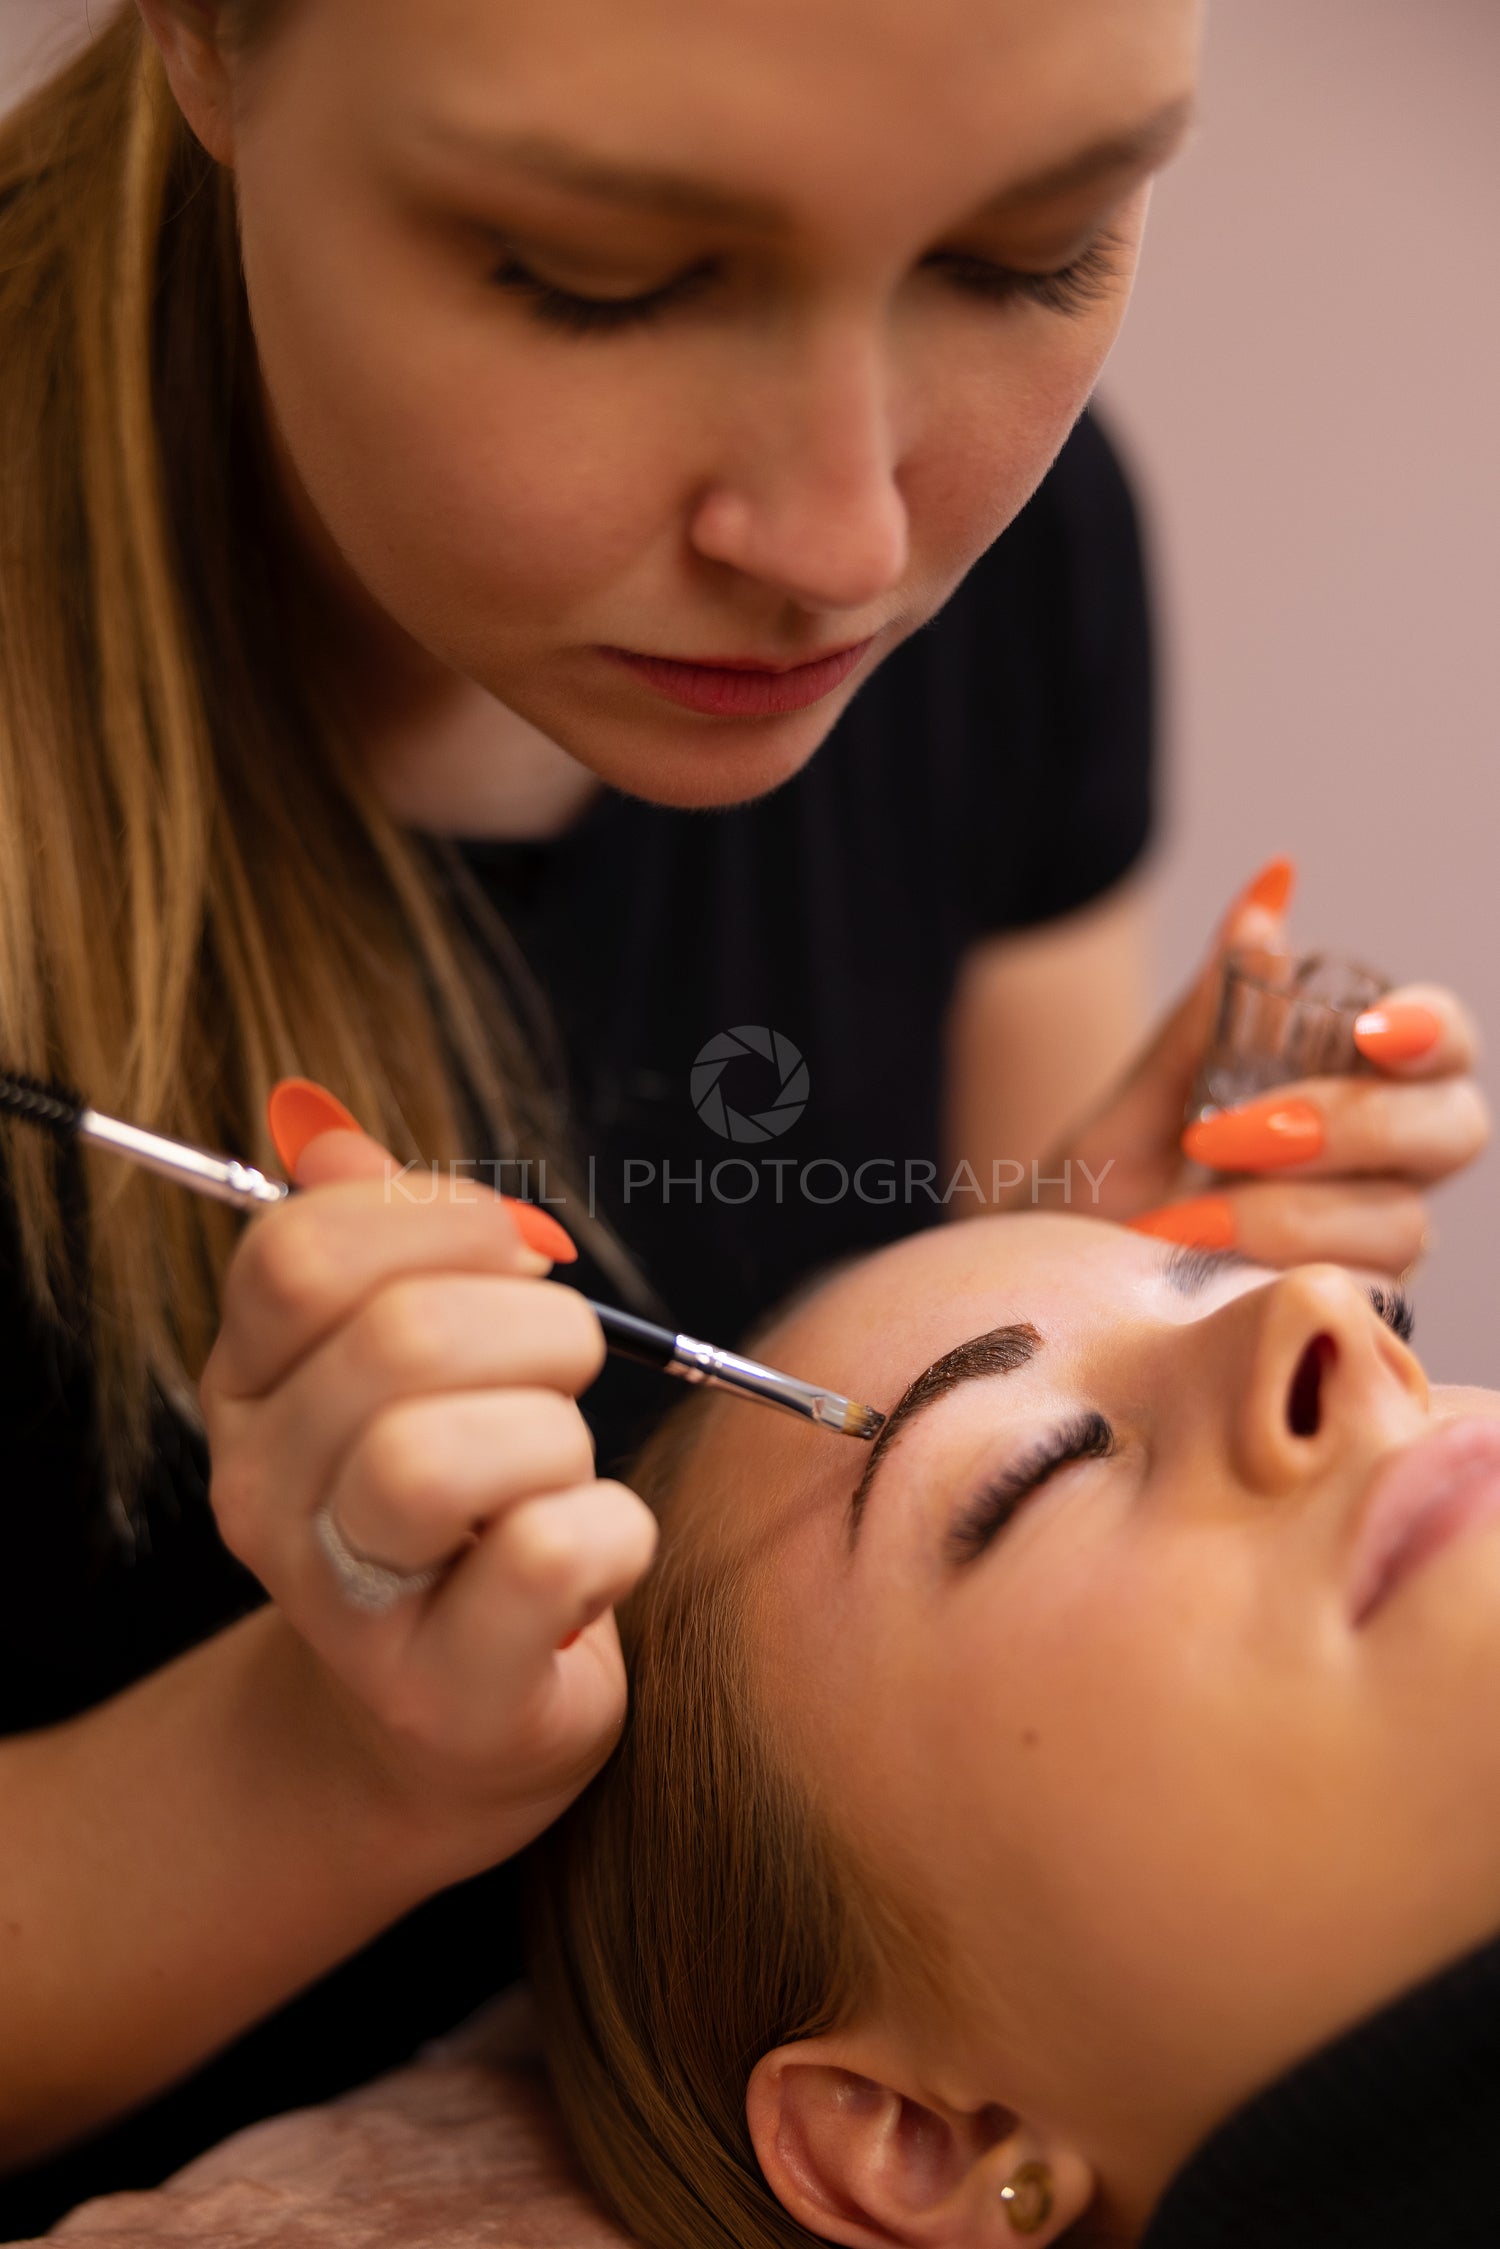 Cosmetologist Applying Dye On Female Client's Eyebrow